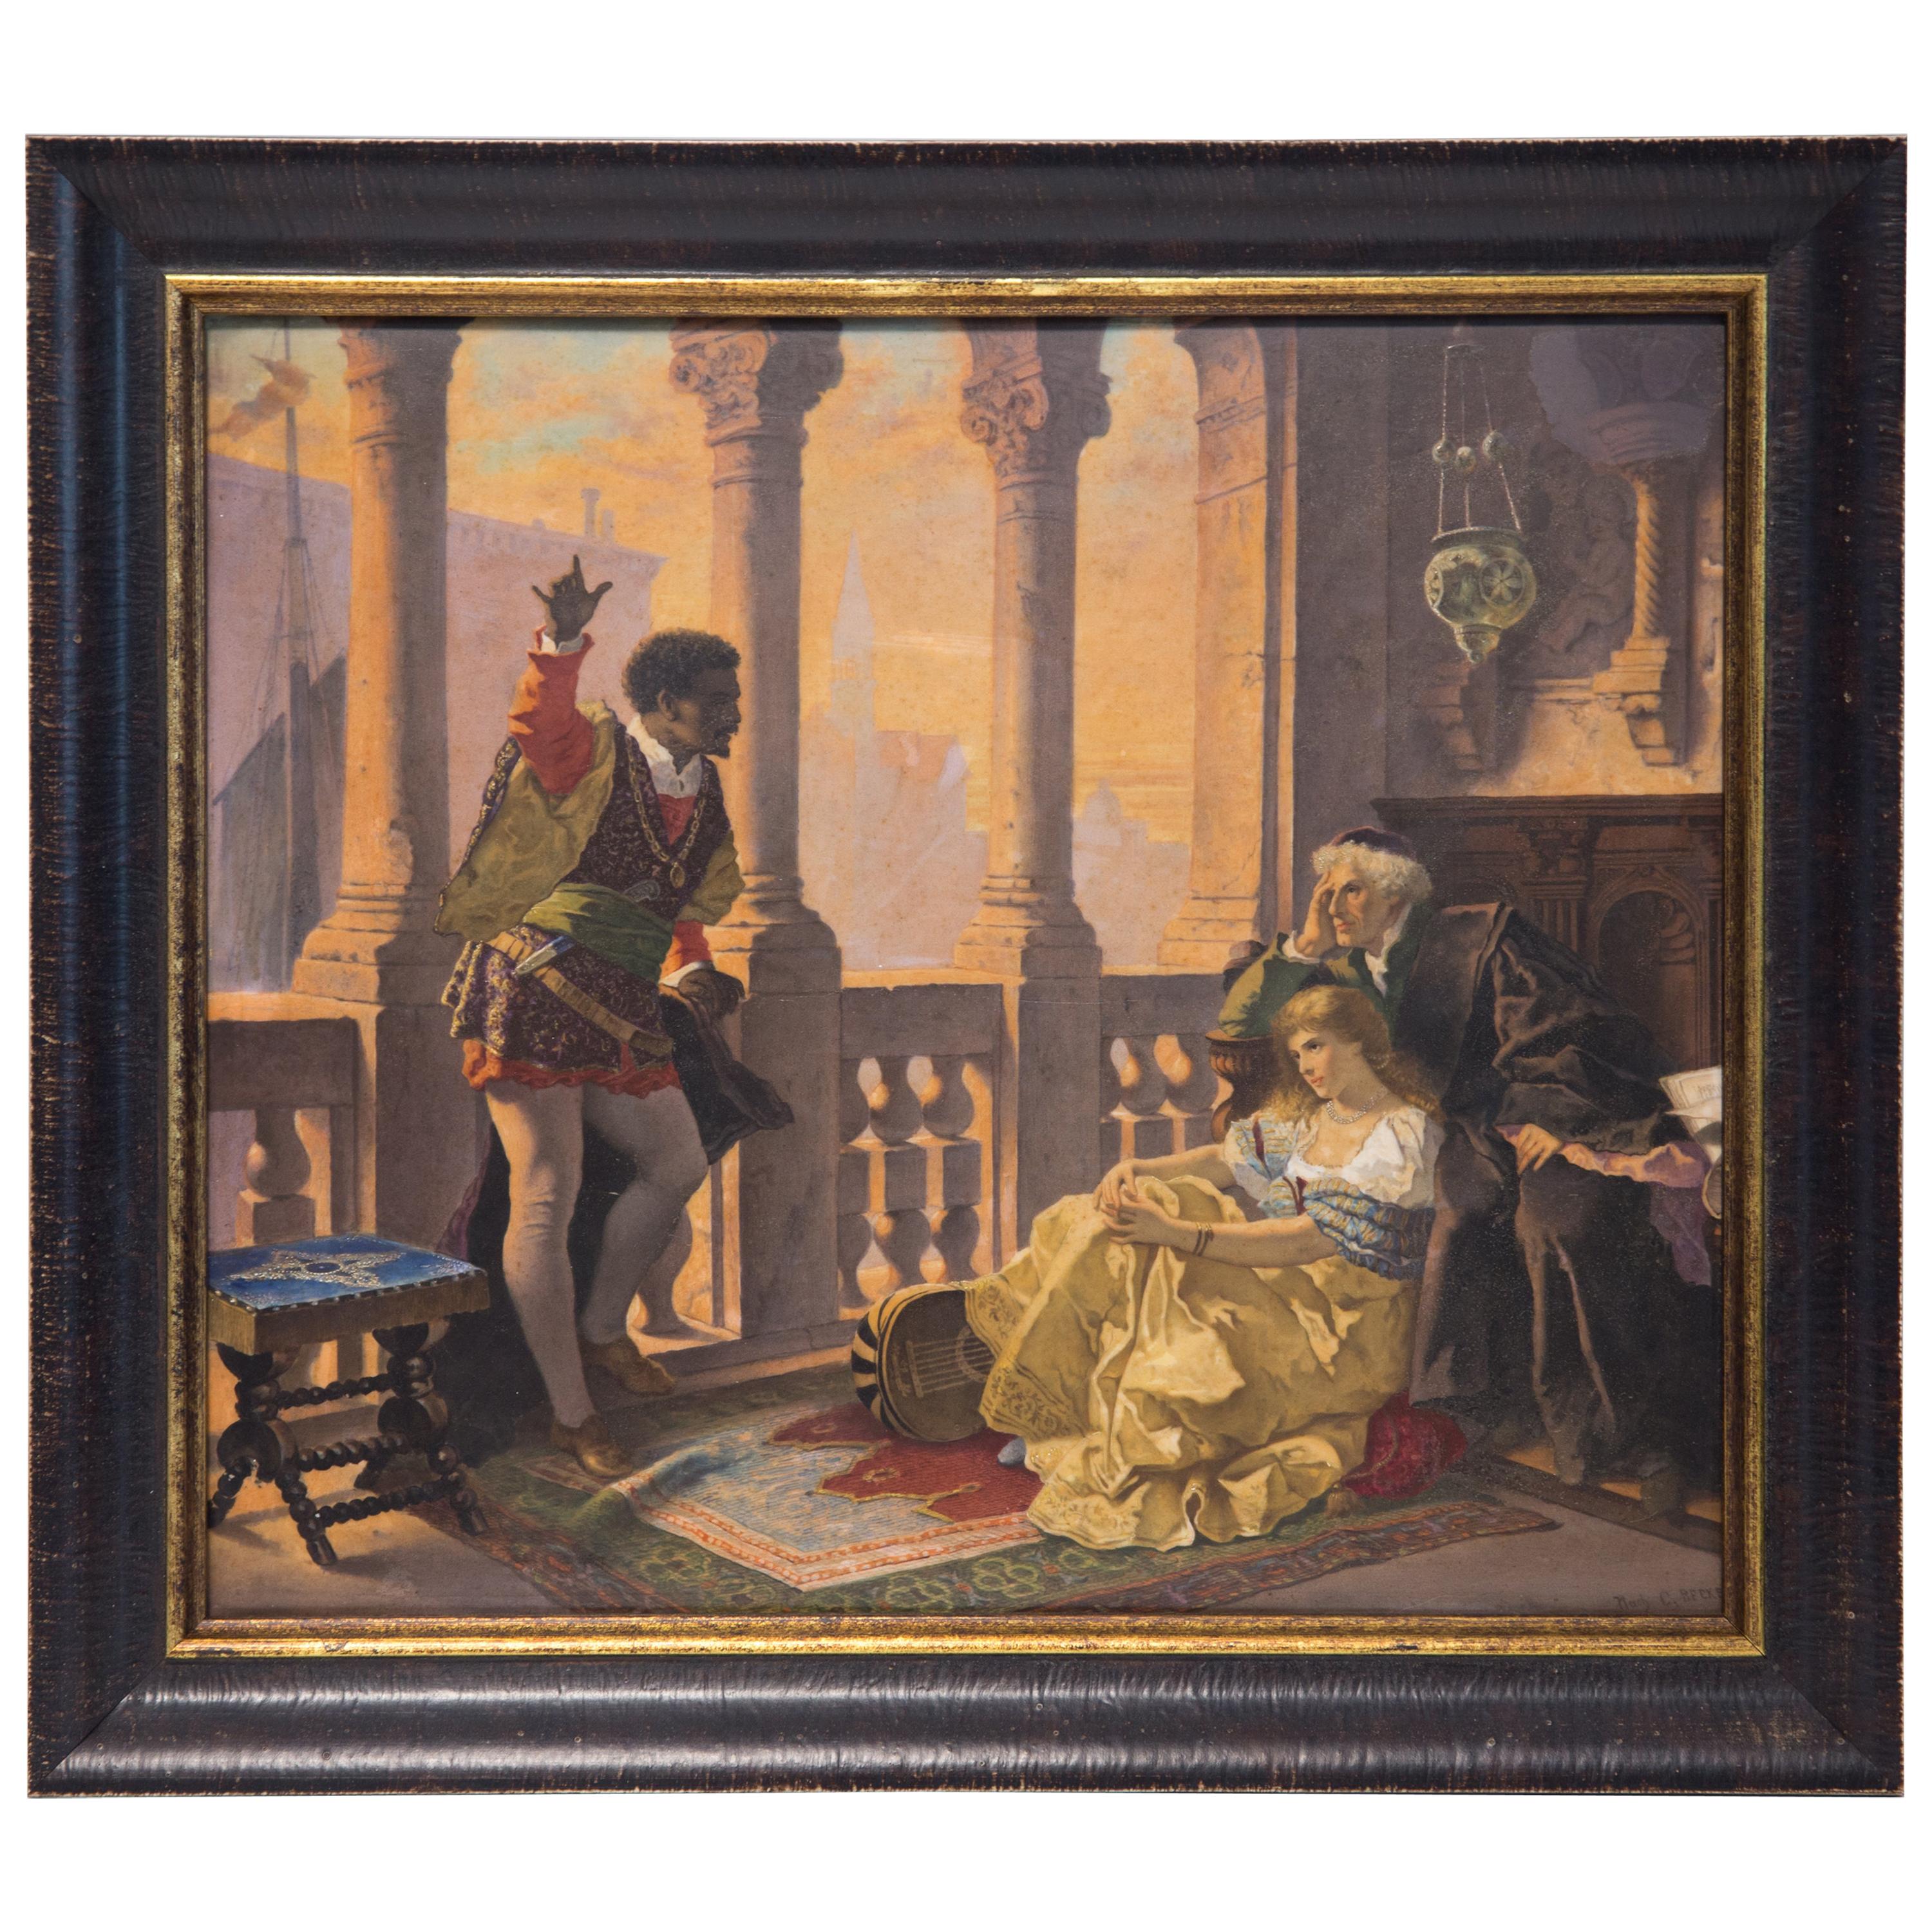 KPM Large Porcelain Plaque Hand Painted with Venetian Scene from "Othello"